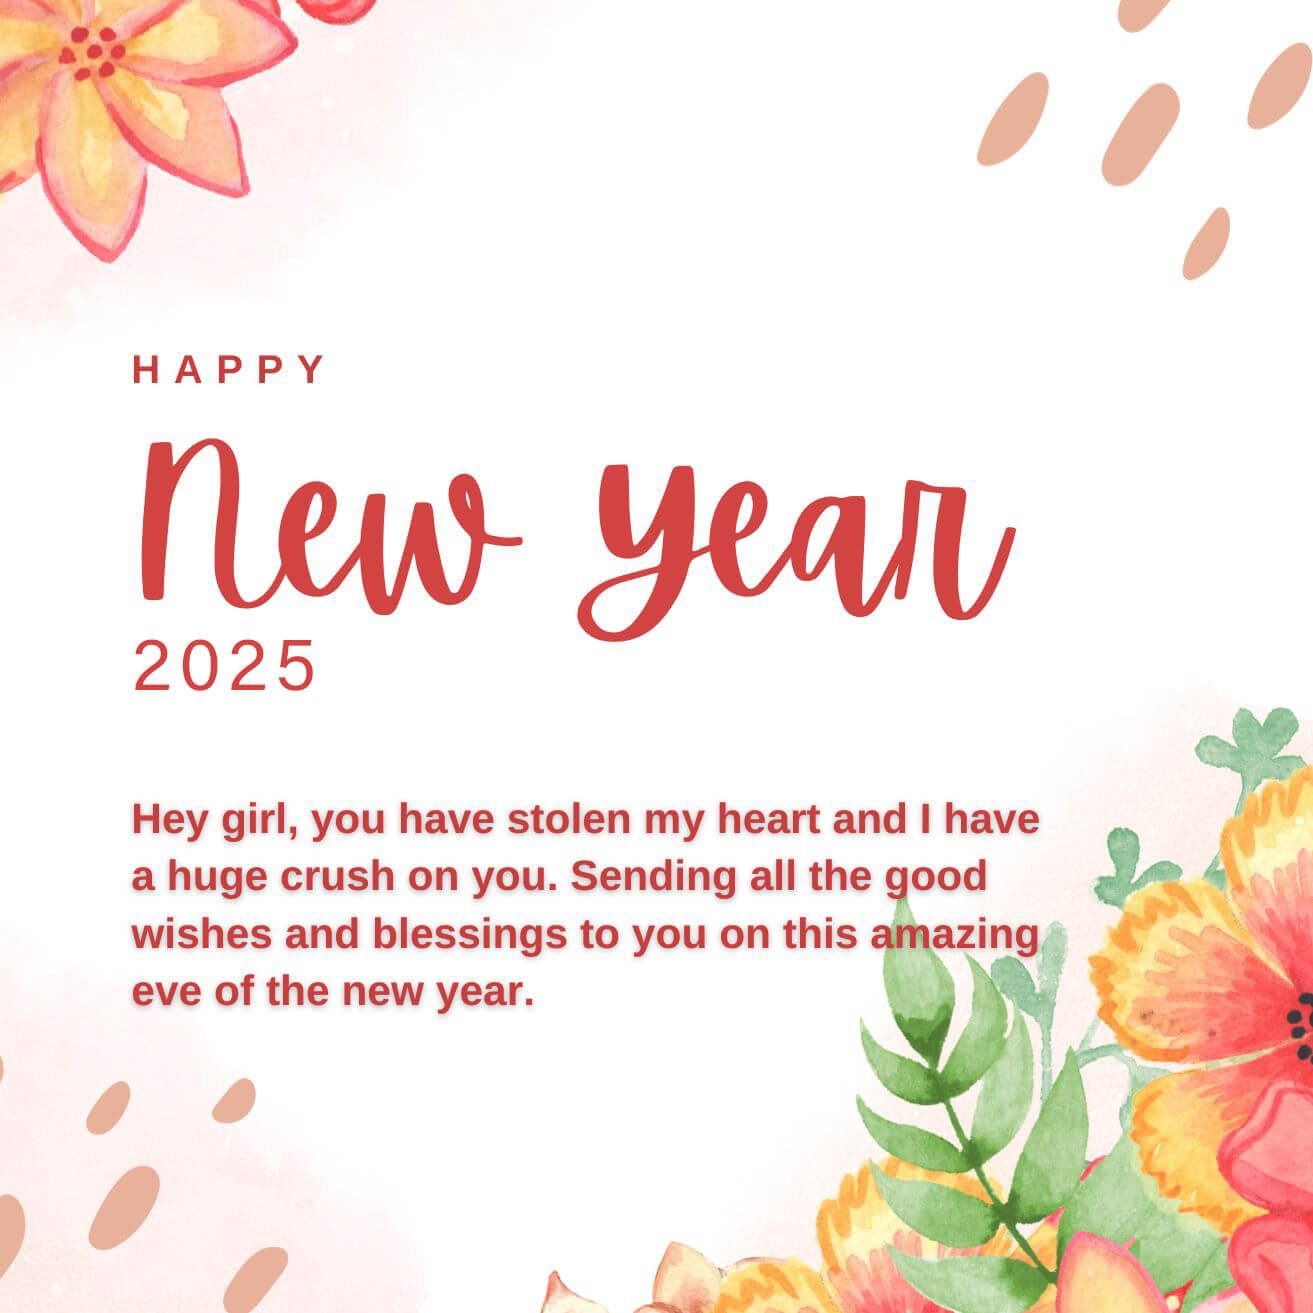 2025 Happy New Year Wishes For Crush